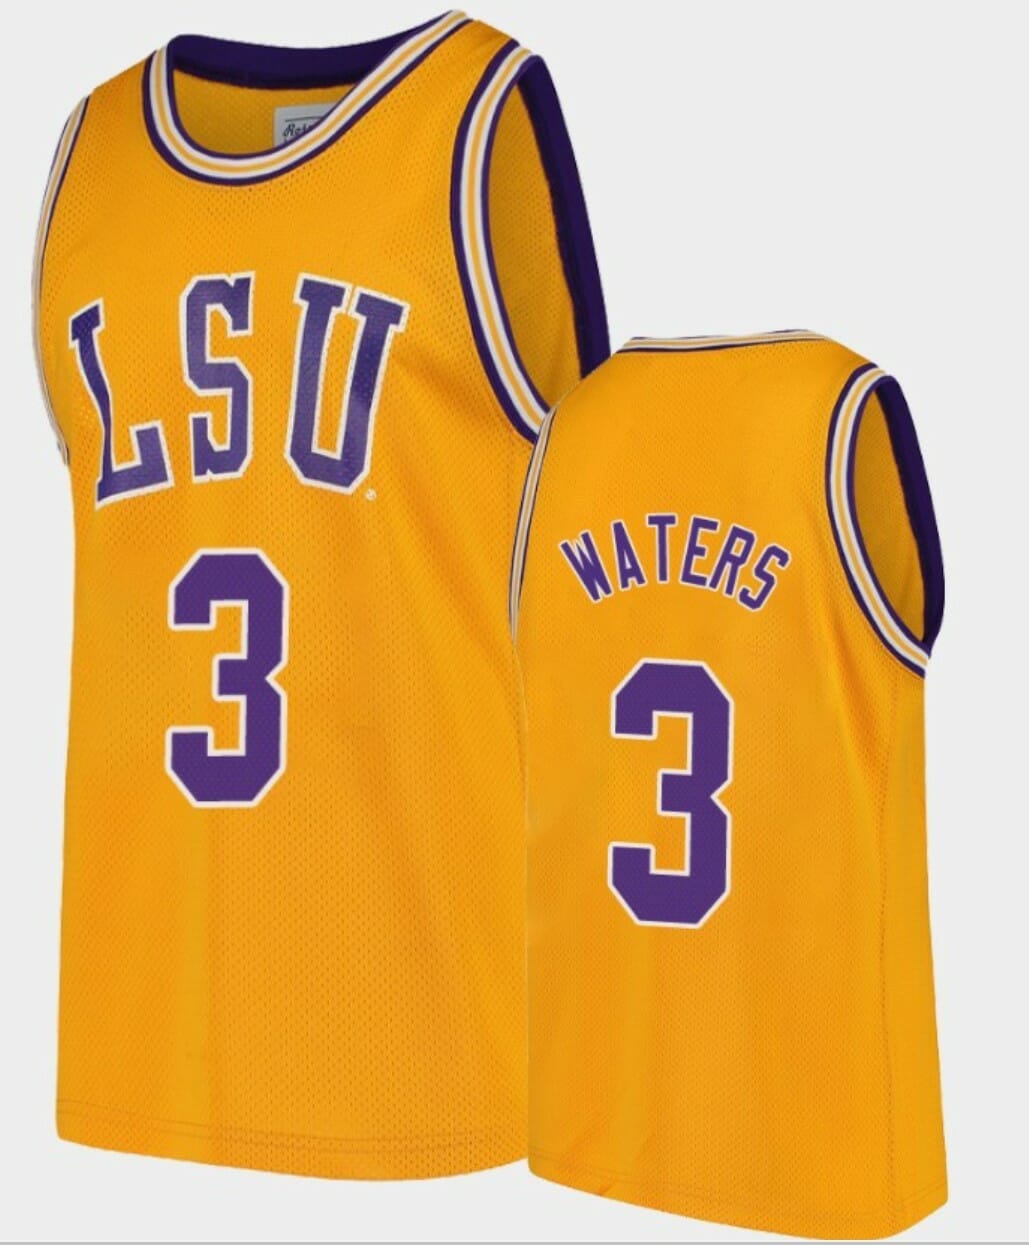 tremont waters jersey